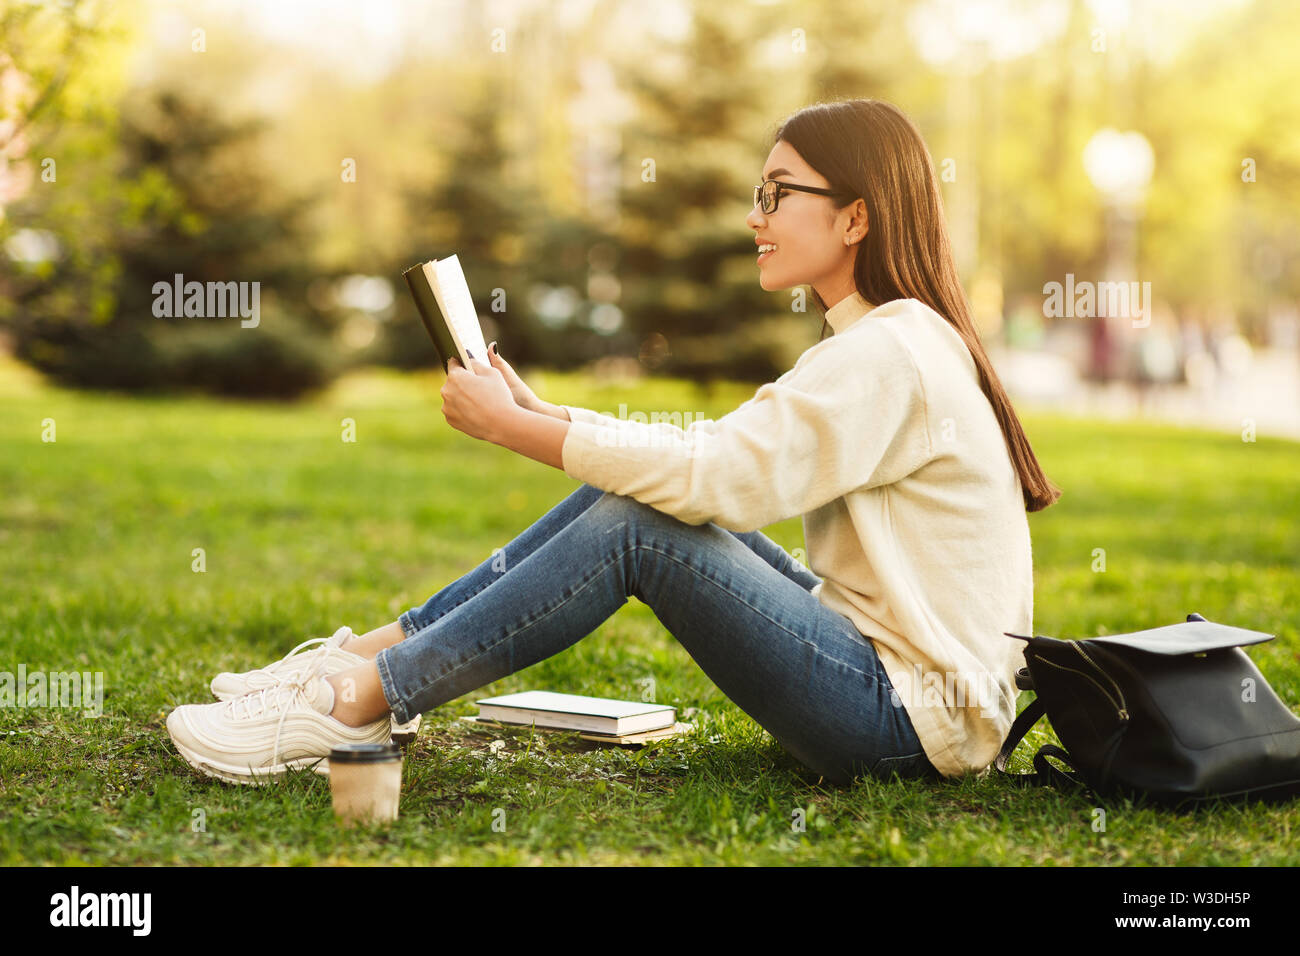 Girl preparing for lectures, reading book in college campus Stock Photo